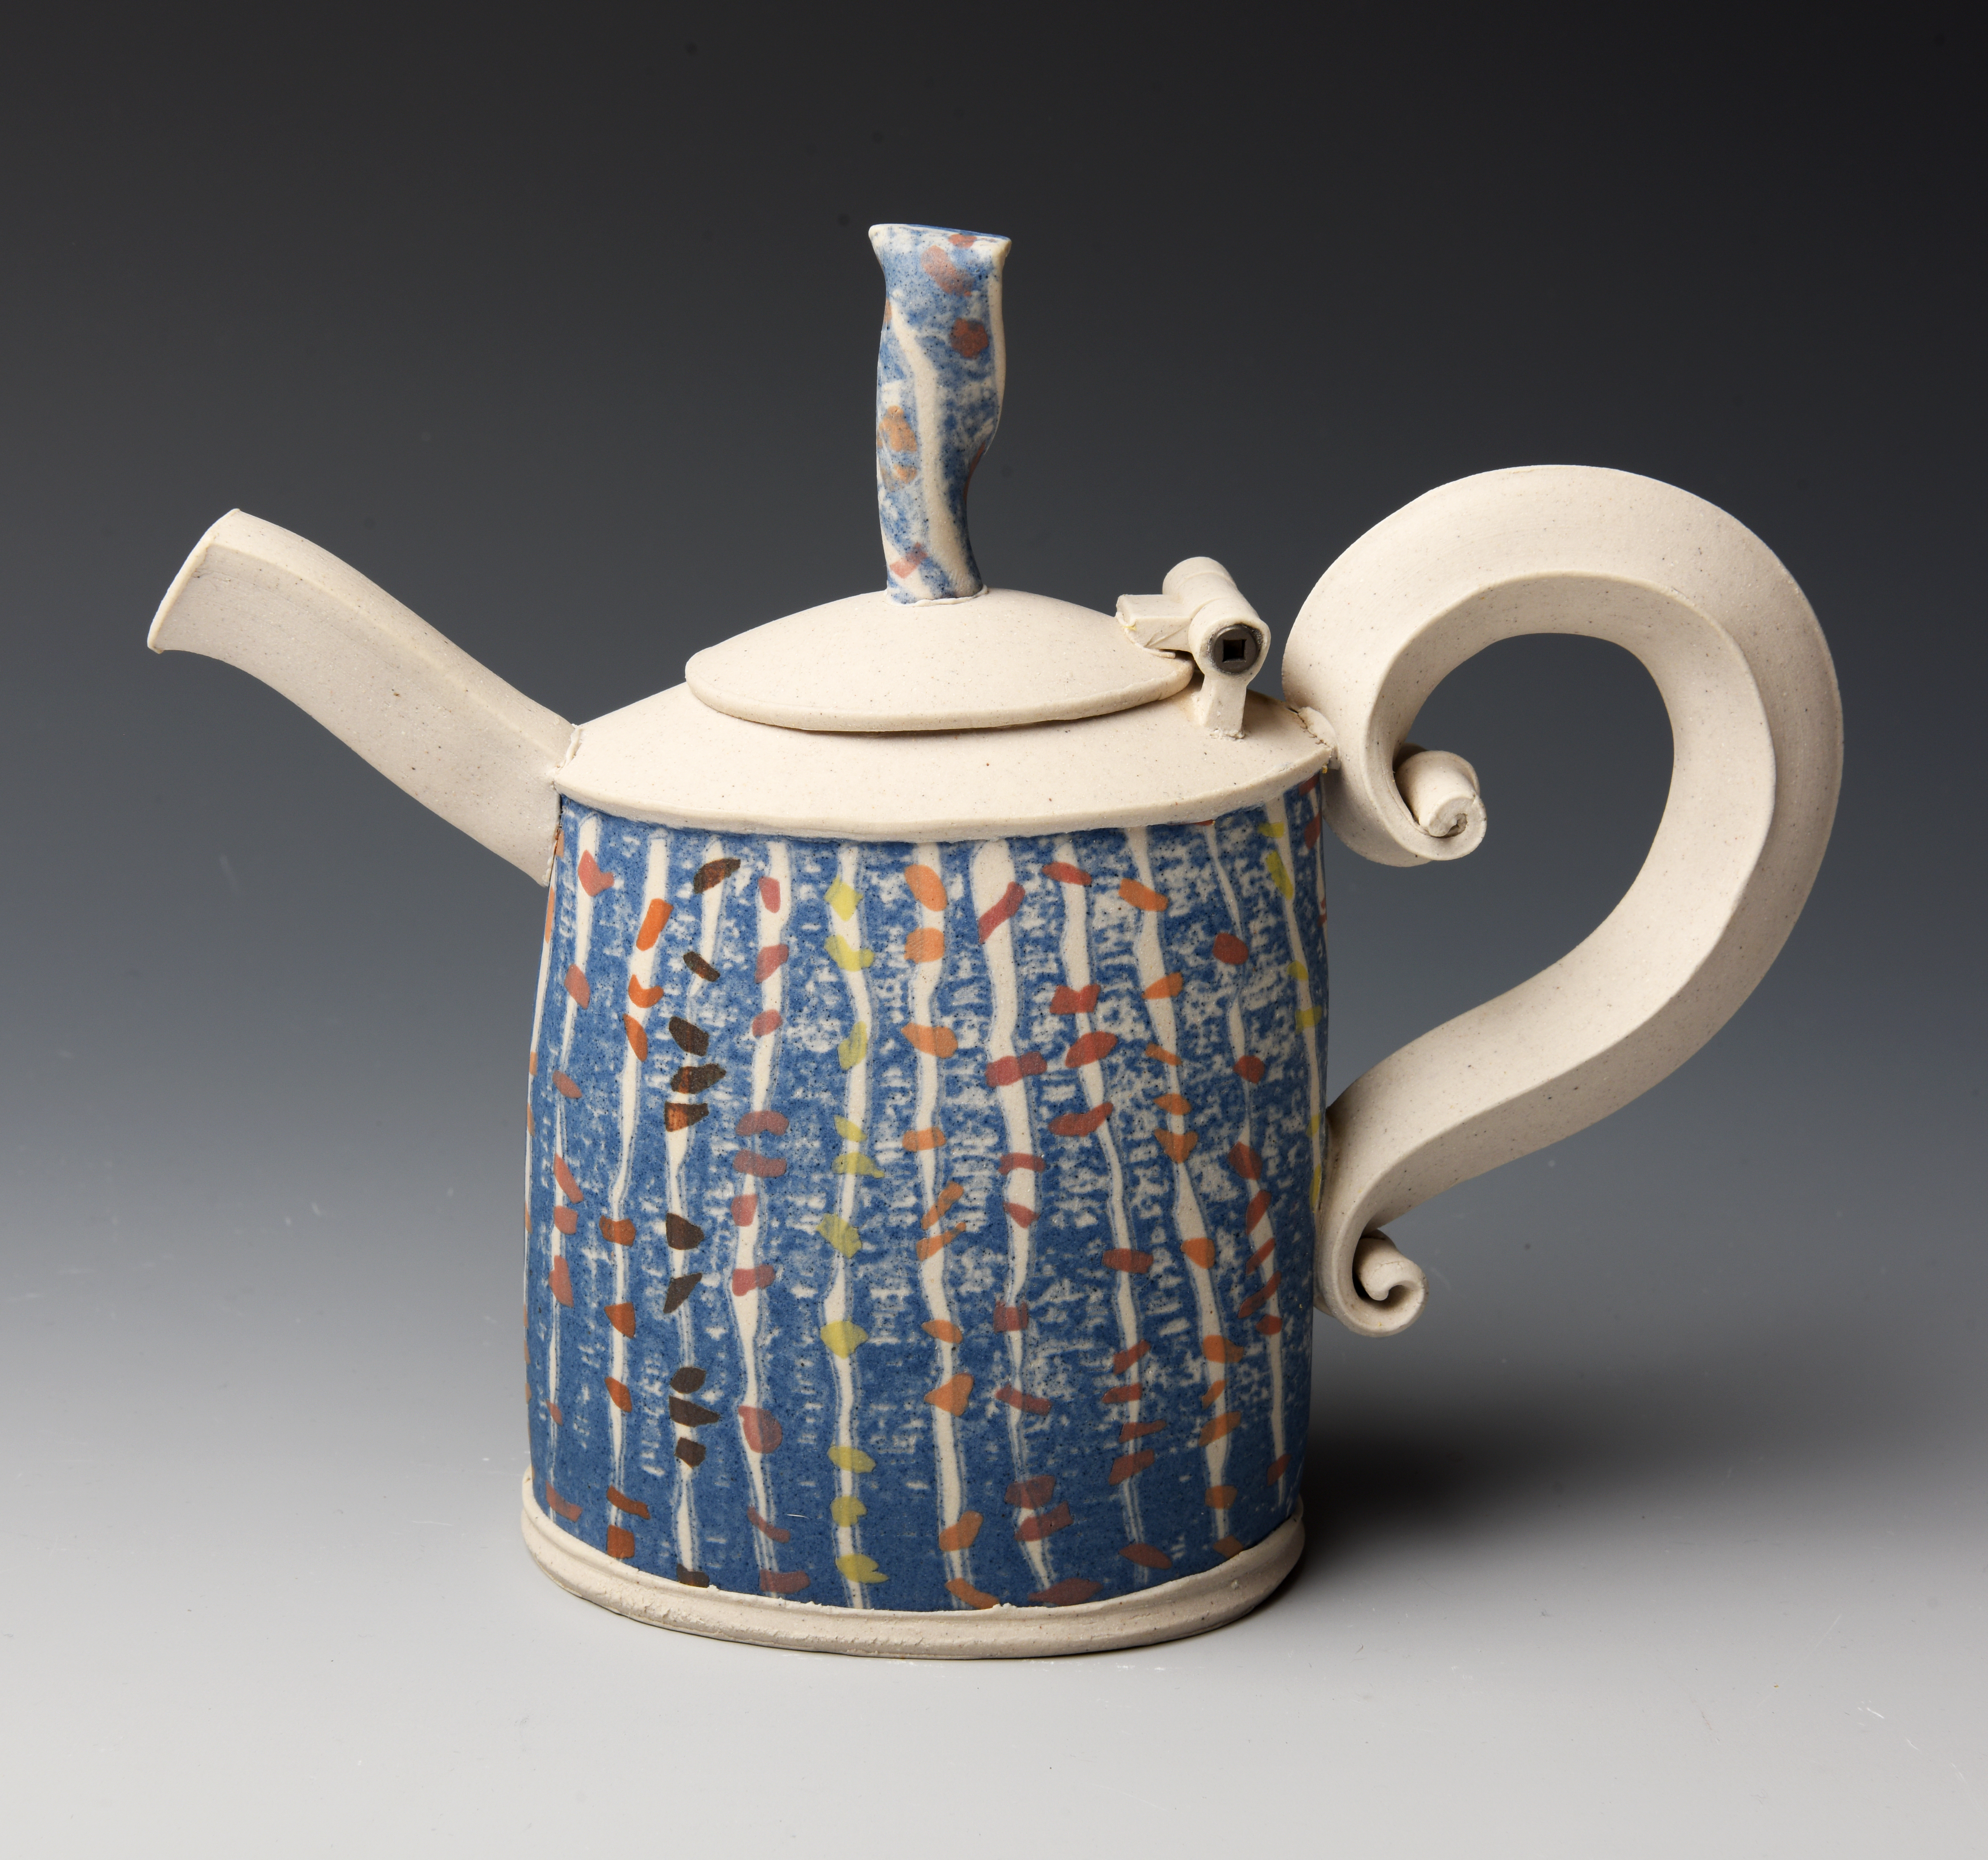 Hayne Bayless, Small Blue Teapot with Hinge Lid, White stoneware, extrusions and slabs, cobalt slip and inclusion stains, metal hinge pin, cone 10 gas reduction, 6.5h 8w 3d